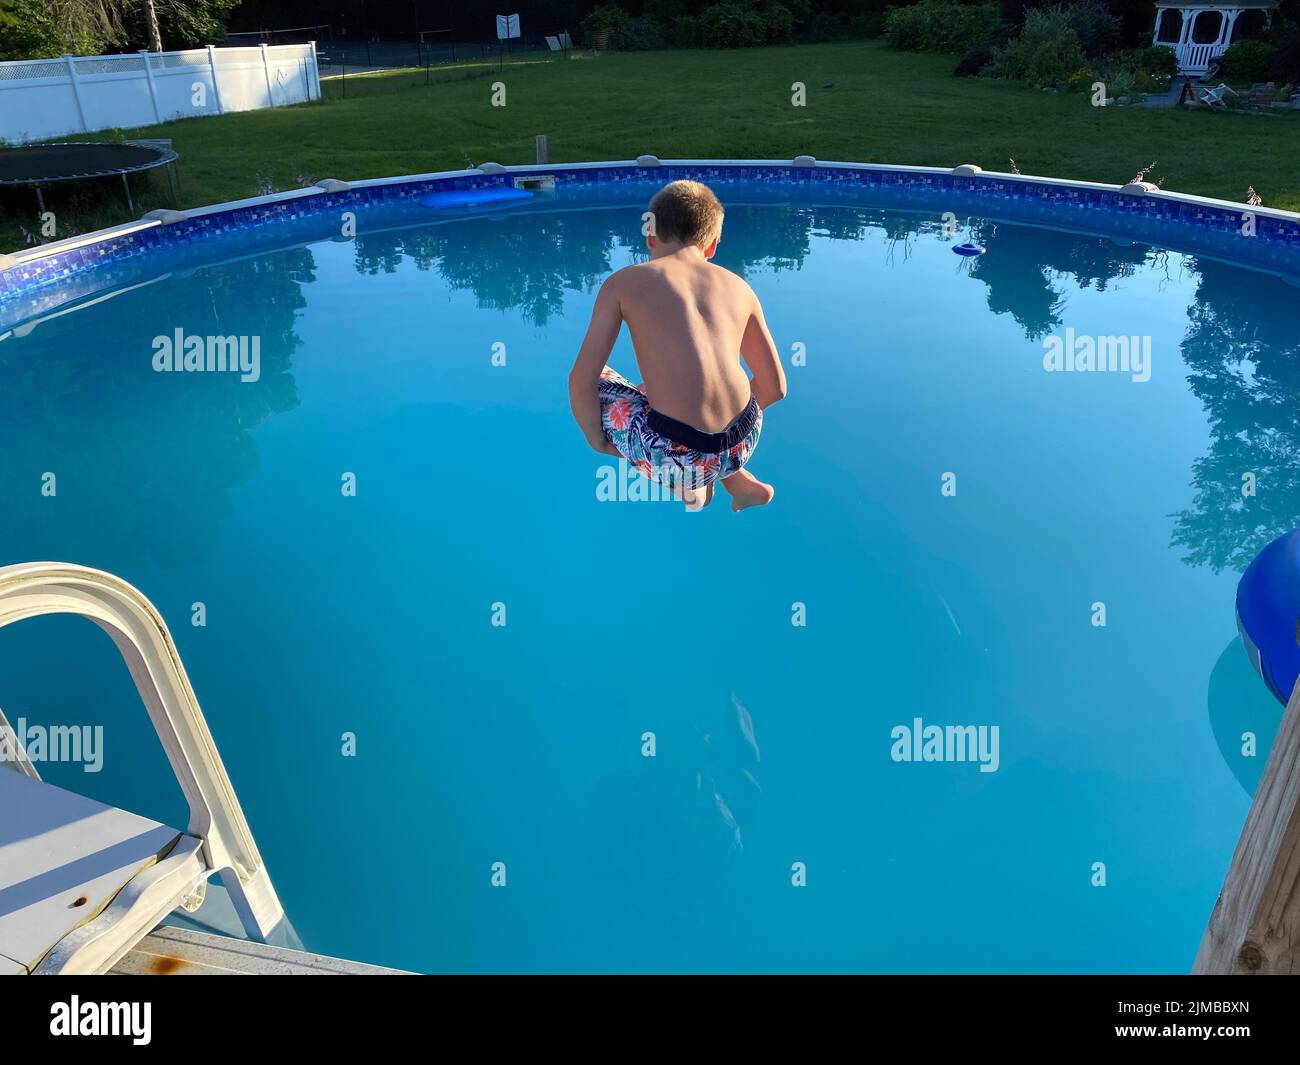 A teenage boy jumping right into the swimming pool with bent knees Stock Photo